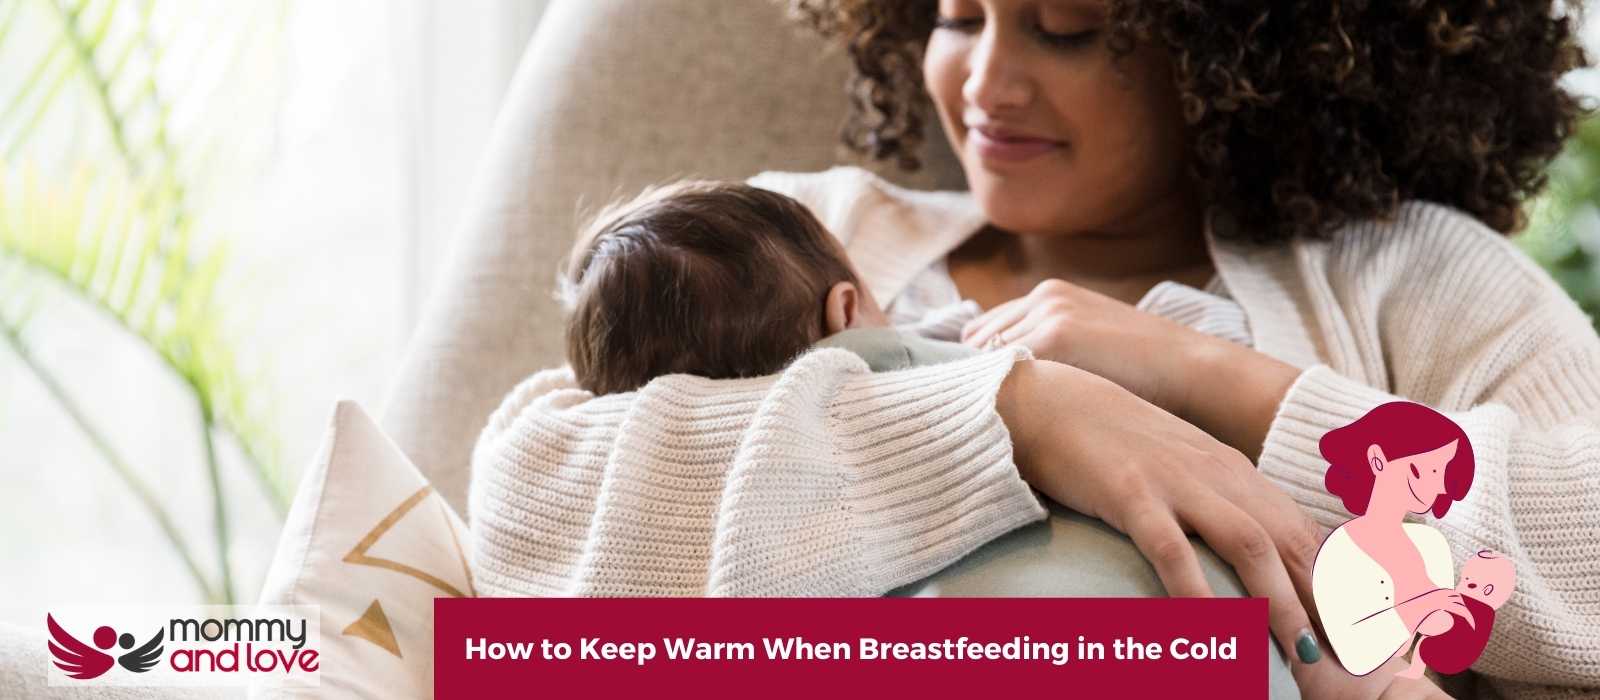 How to Keep Warm When Breastfeeding in the Cold